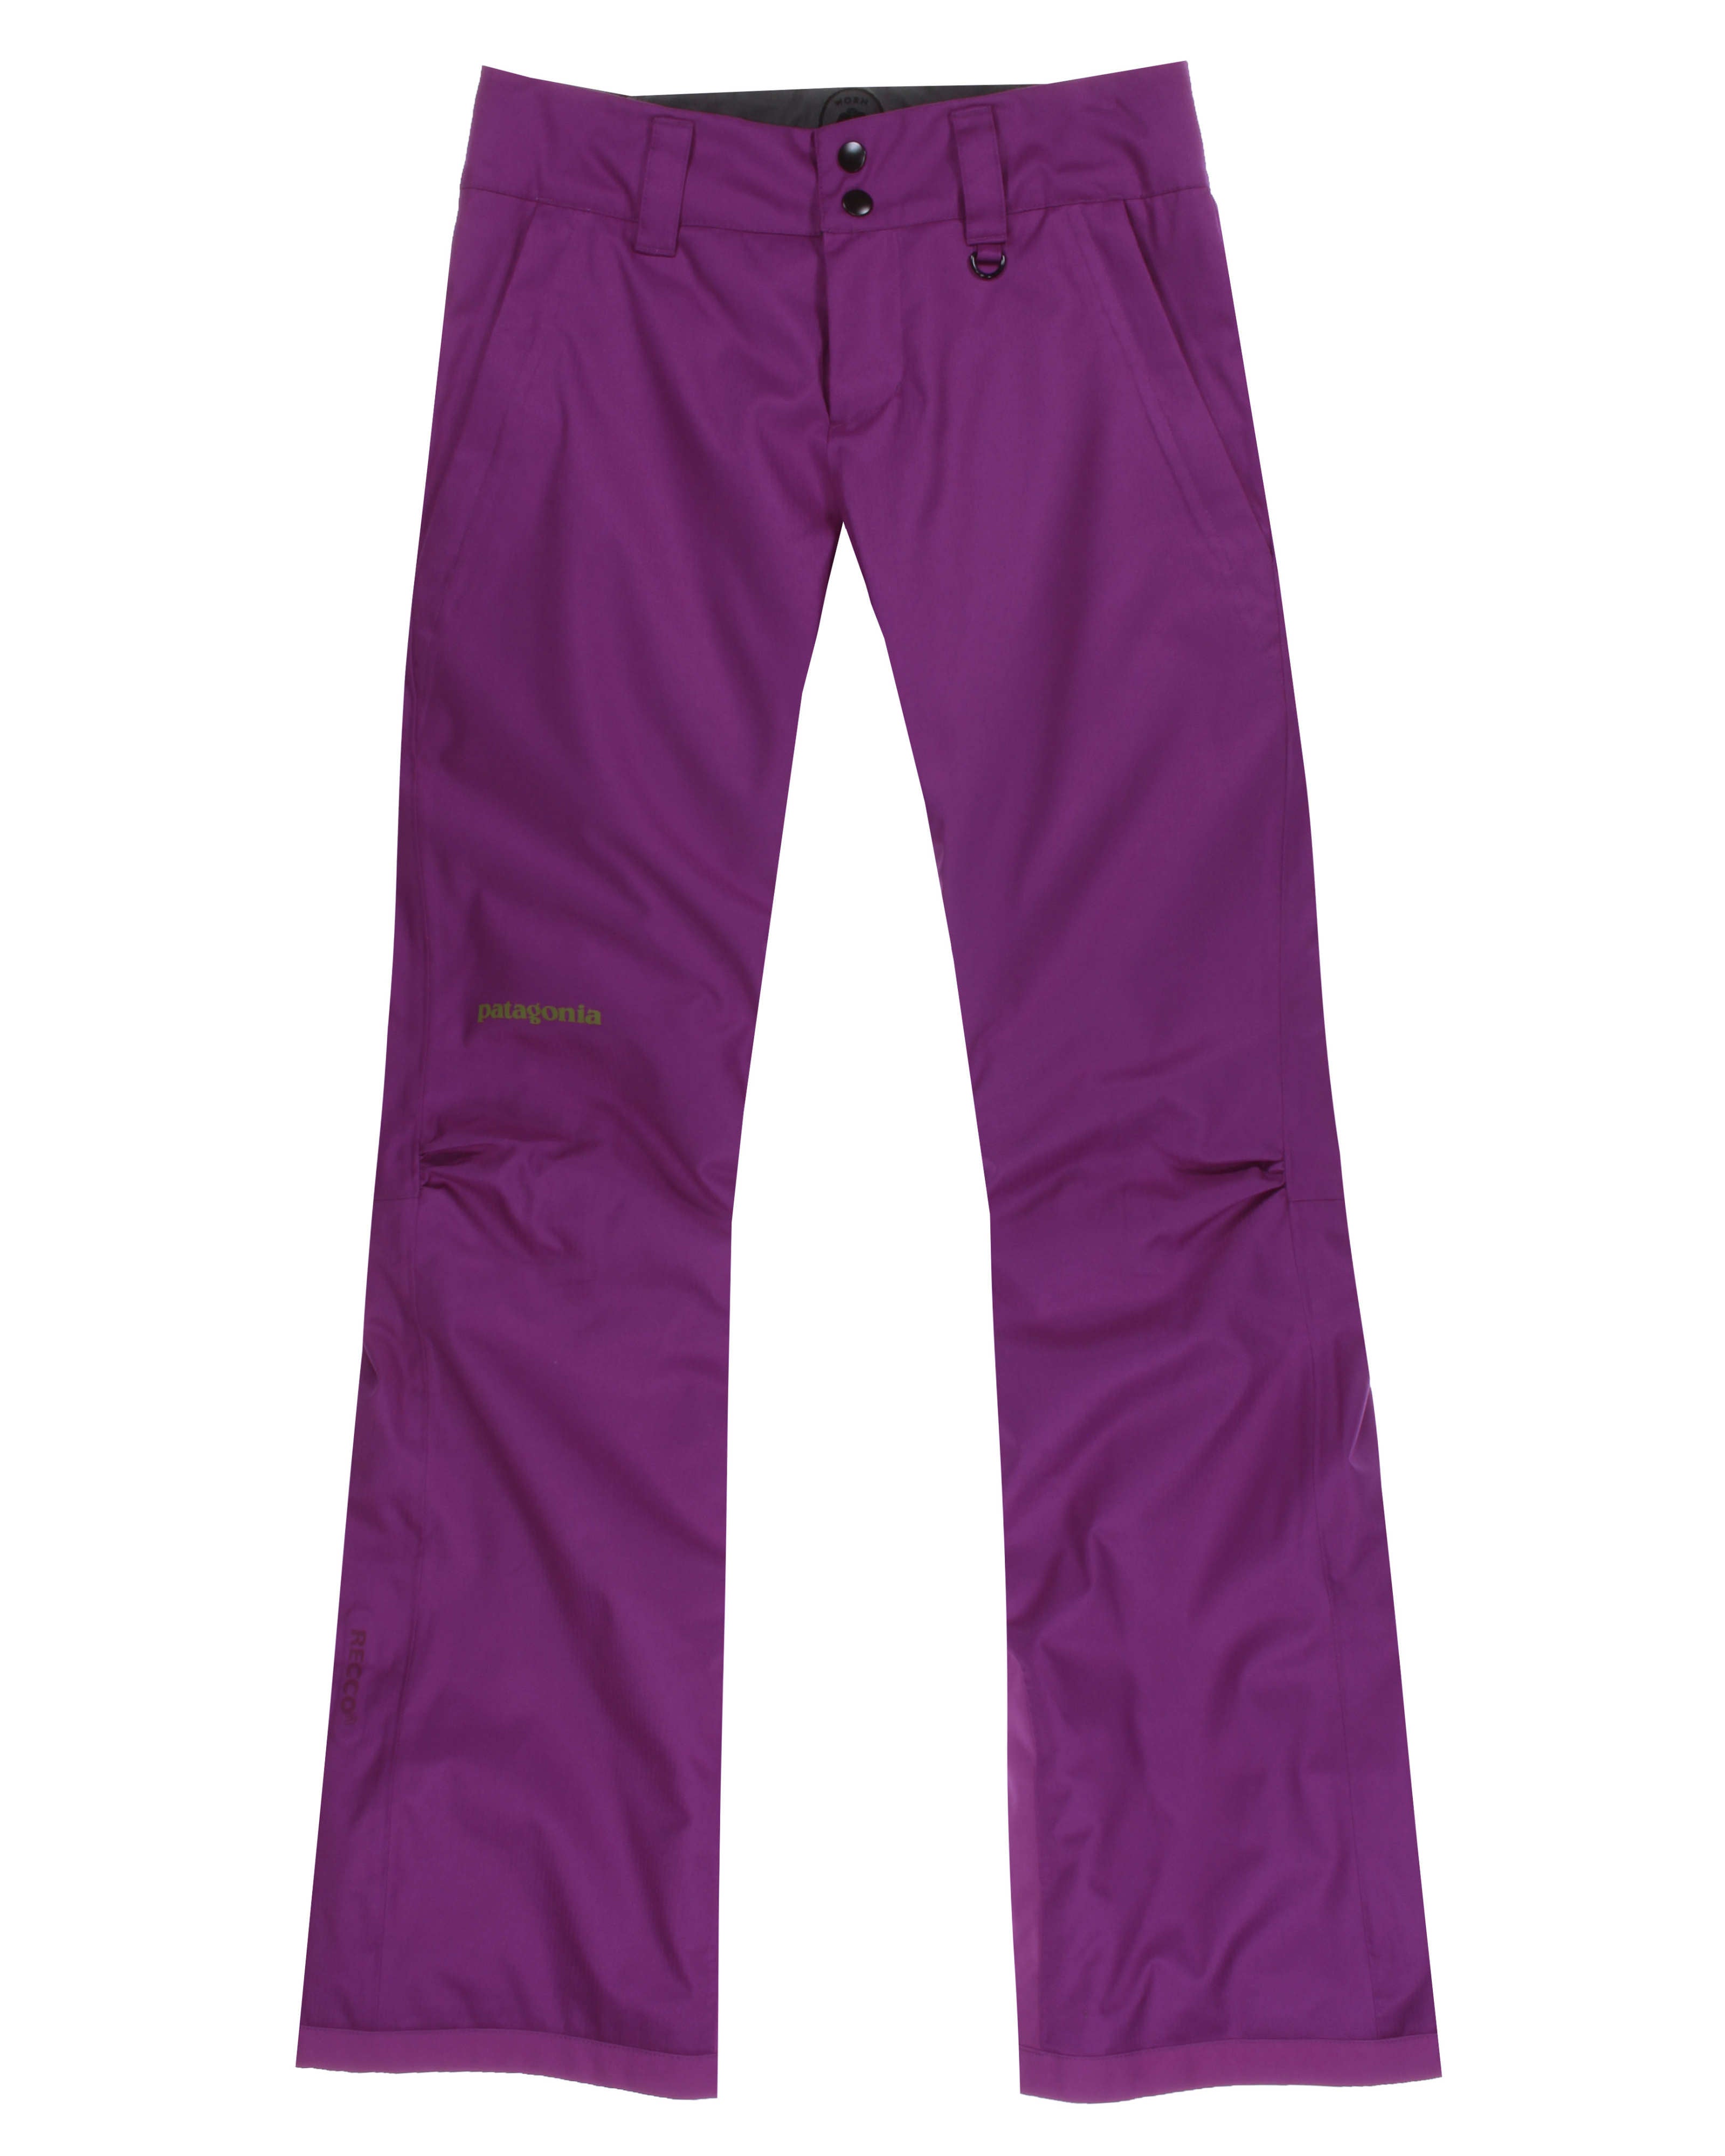 Patagonia Snowbelle Insulated Snow Pants - Regular Women's (Past